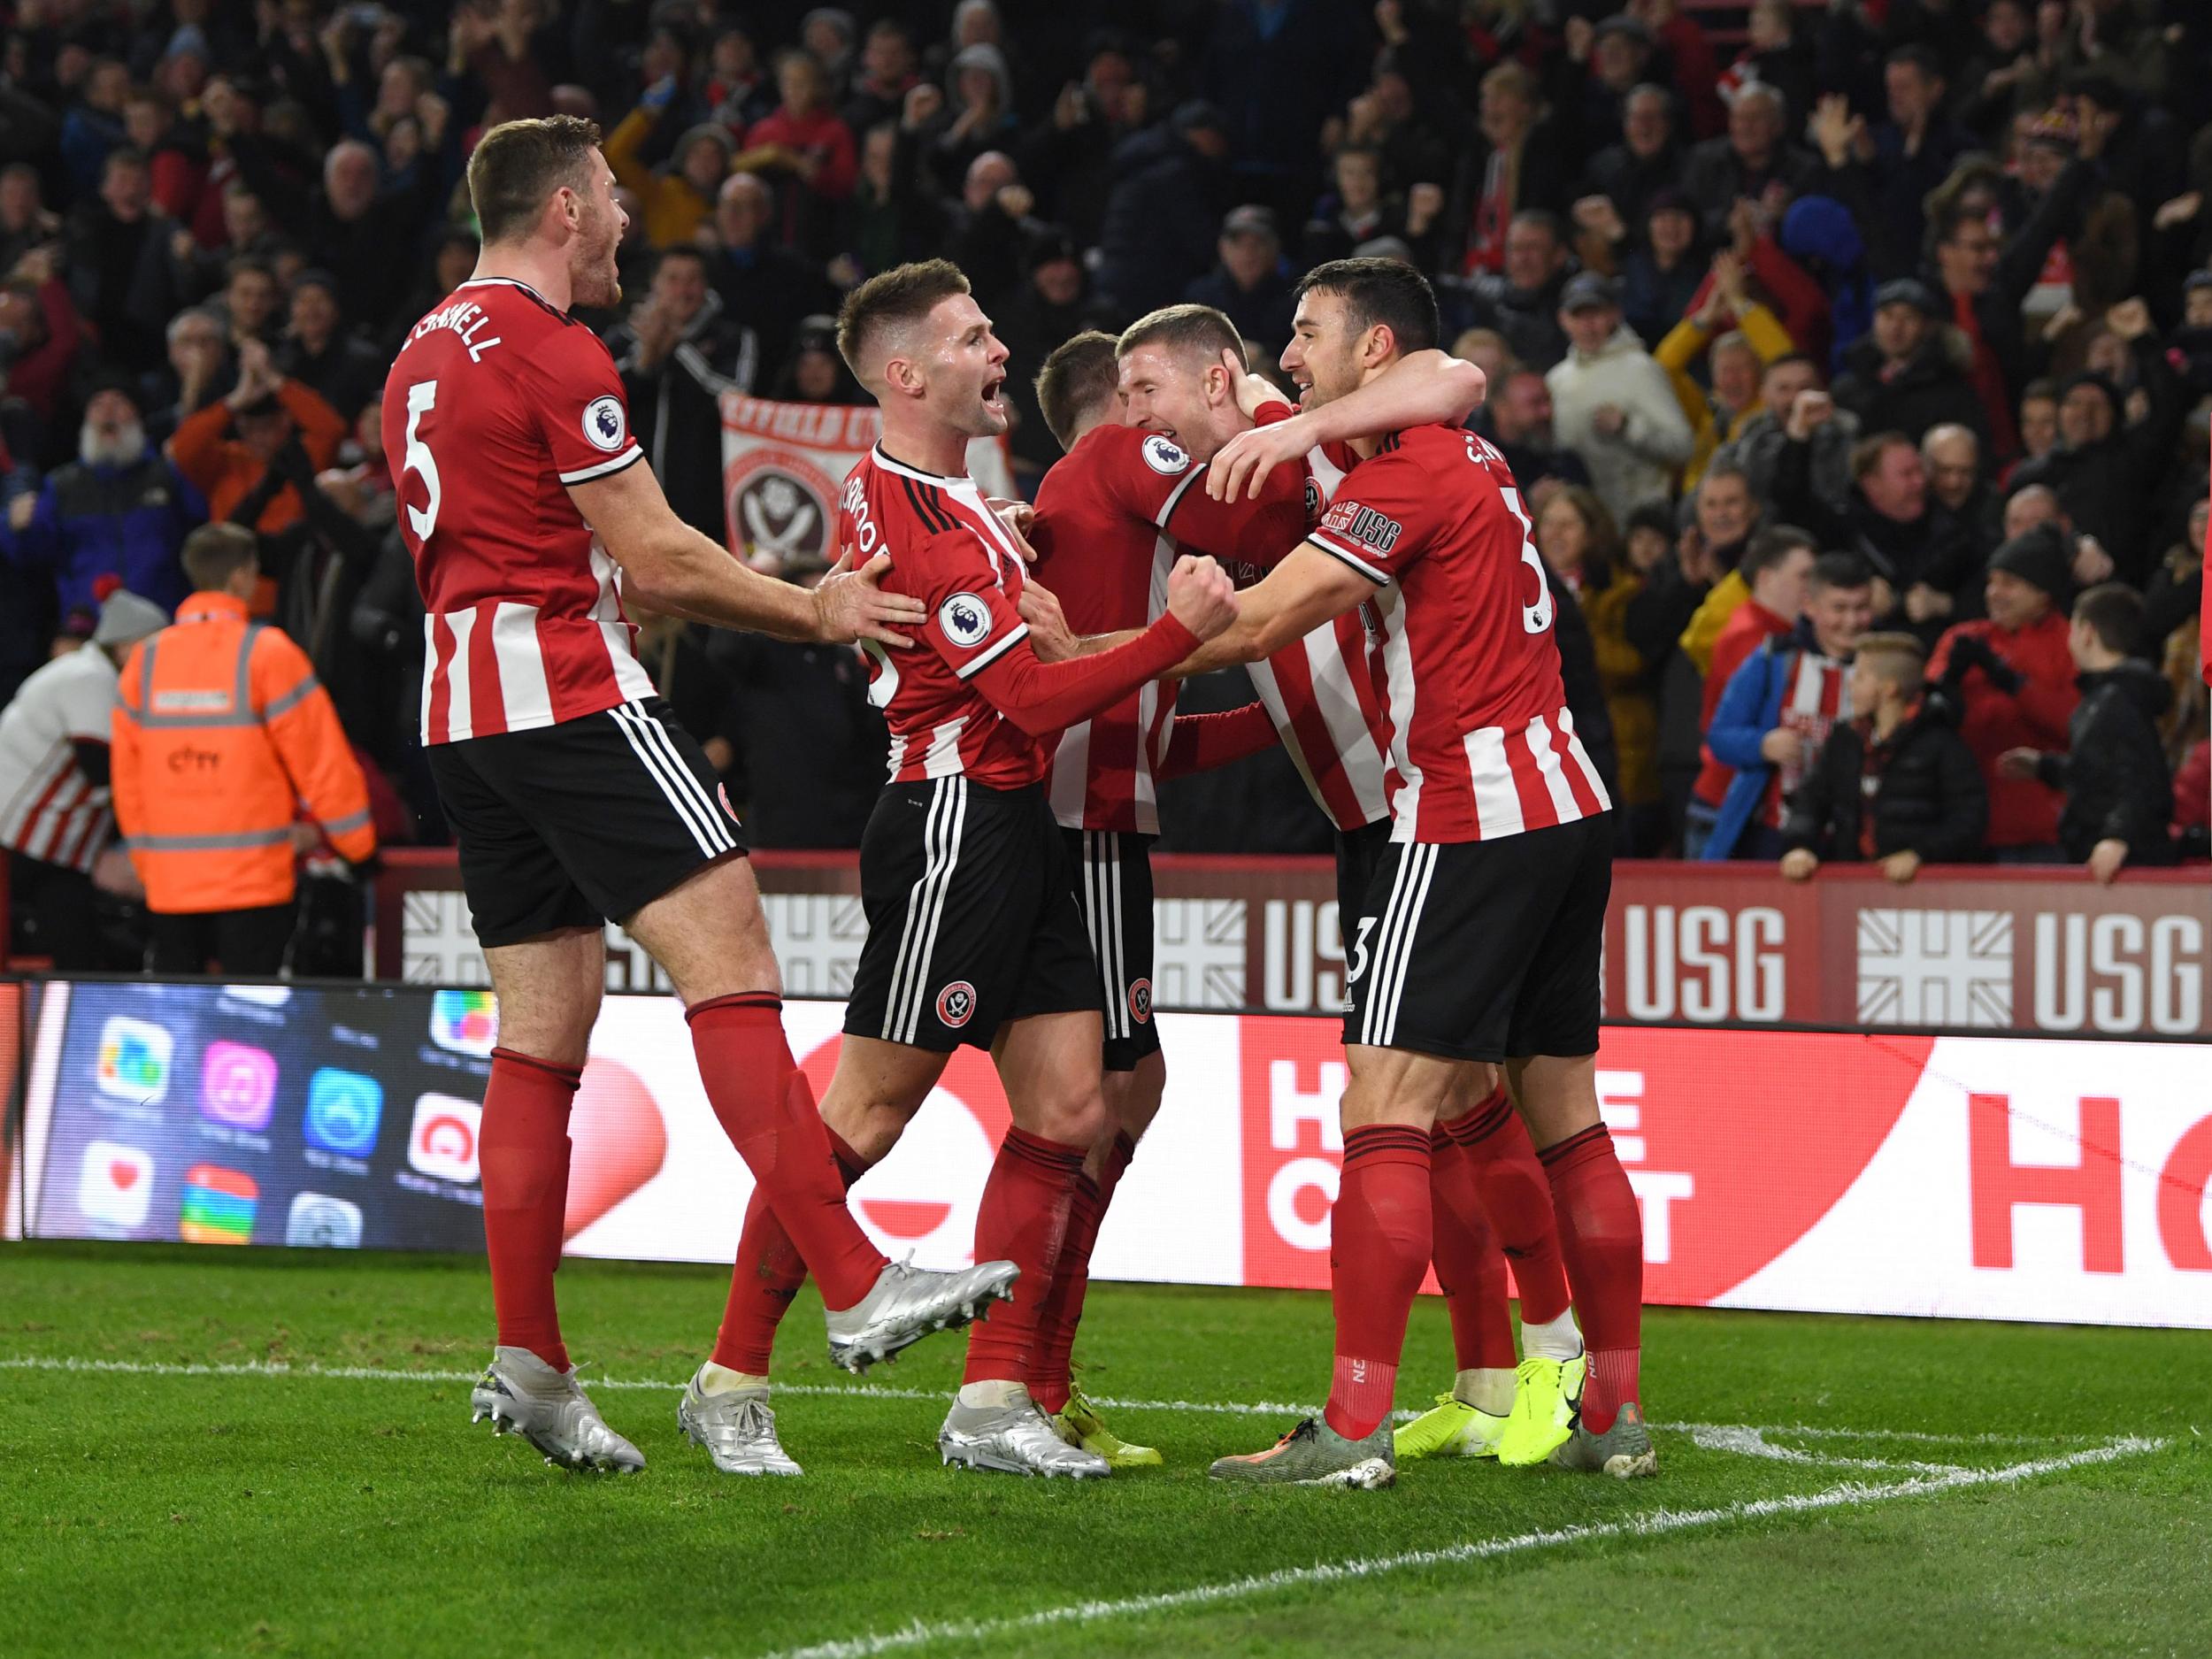 Sheffield United vs Watford predicted line-ups and team news for Amazon